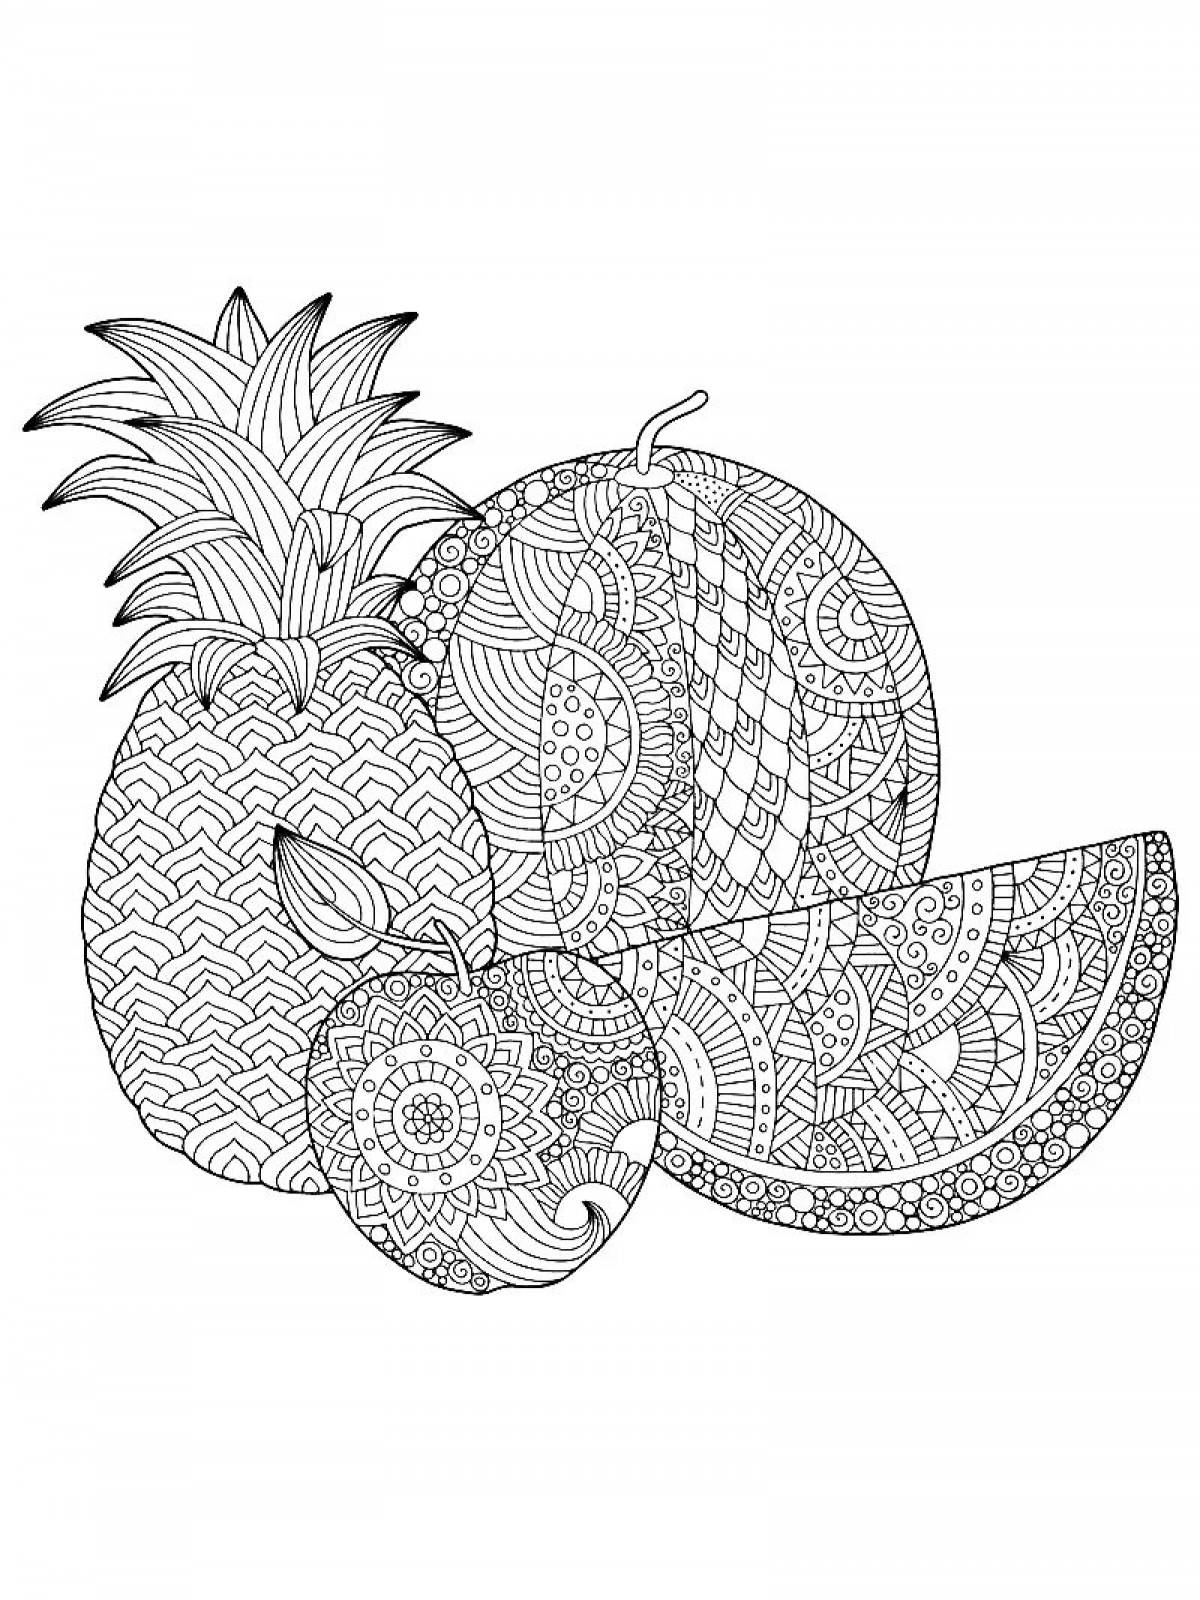 Exciting anti-stress apple coloring book